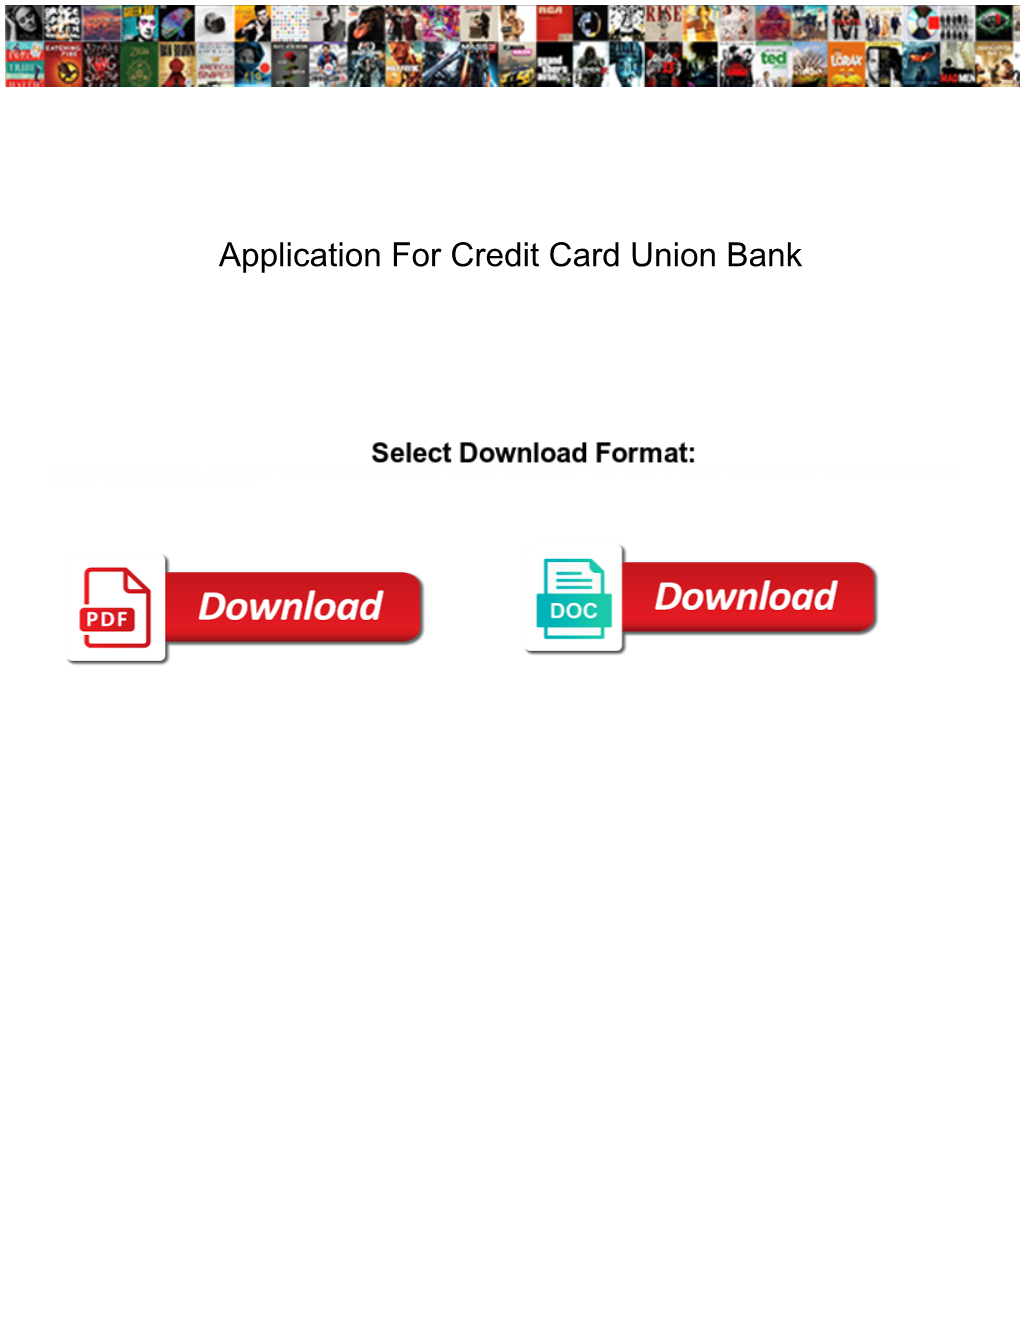 Application for Credit Card Union Bank